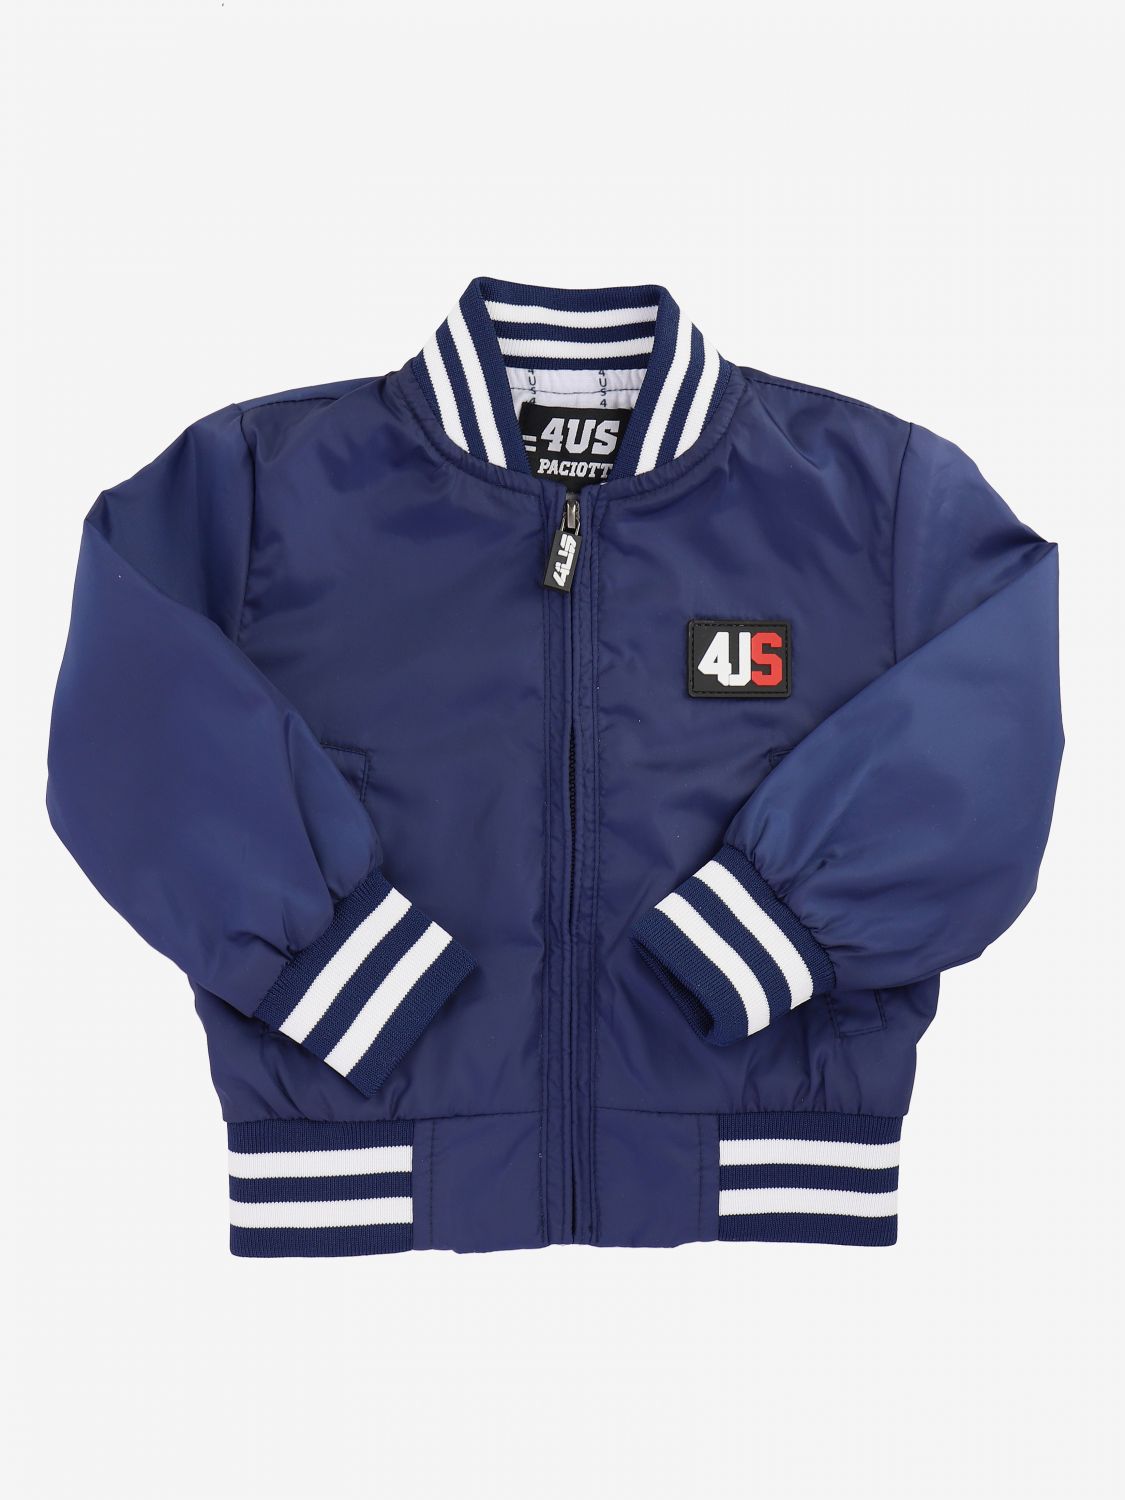 Paciotti 4Us Outlet: jacket for boys - Blue | Paciotti 4Us jacket ...